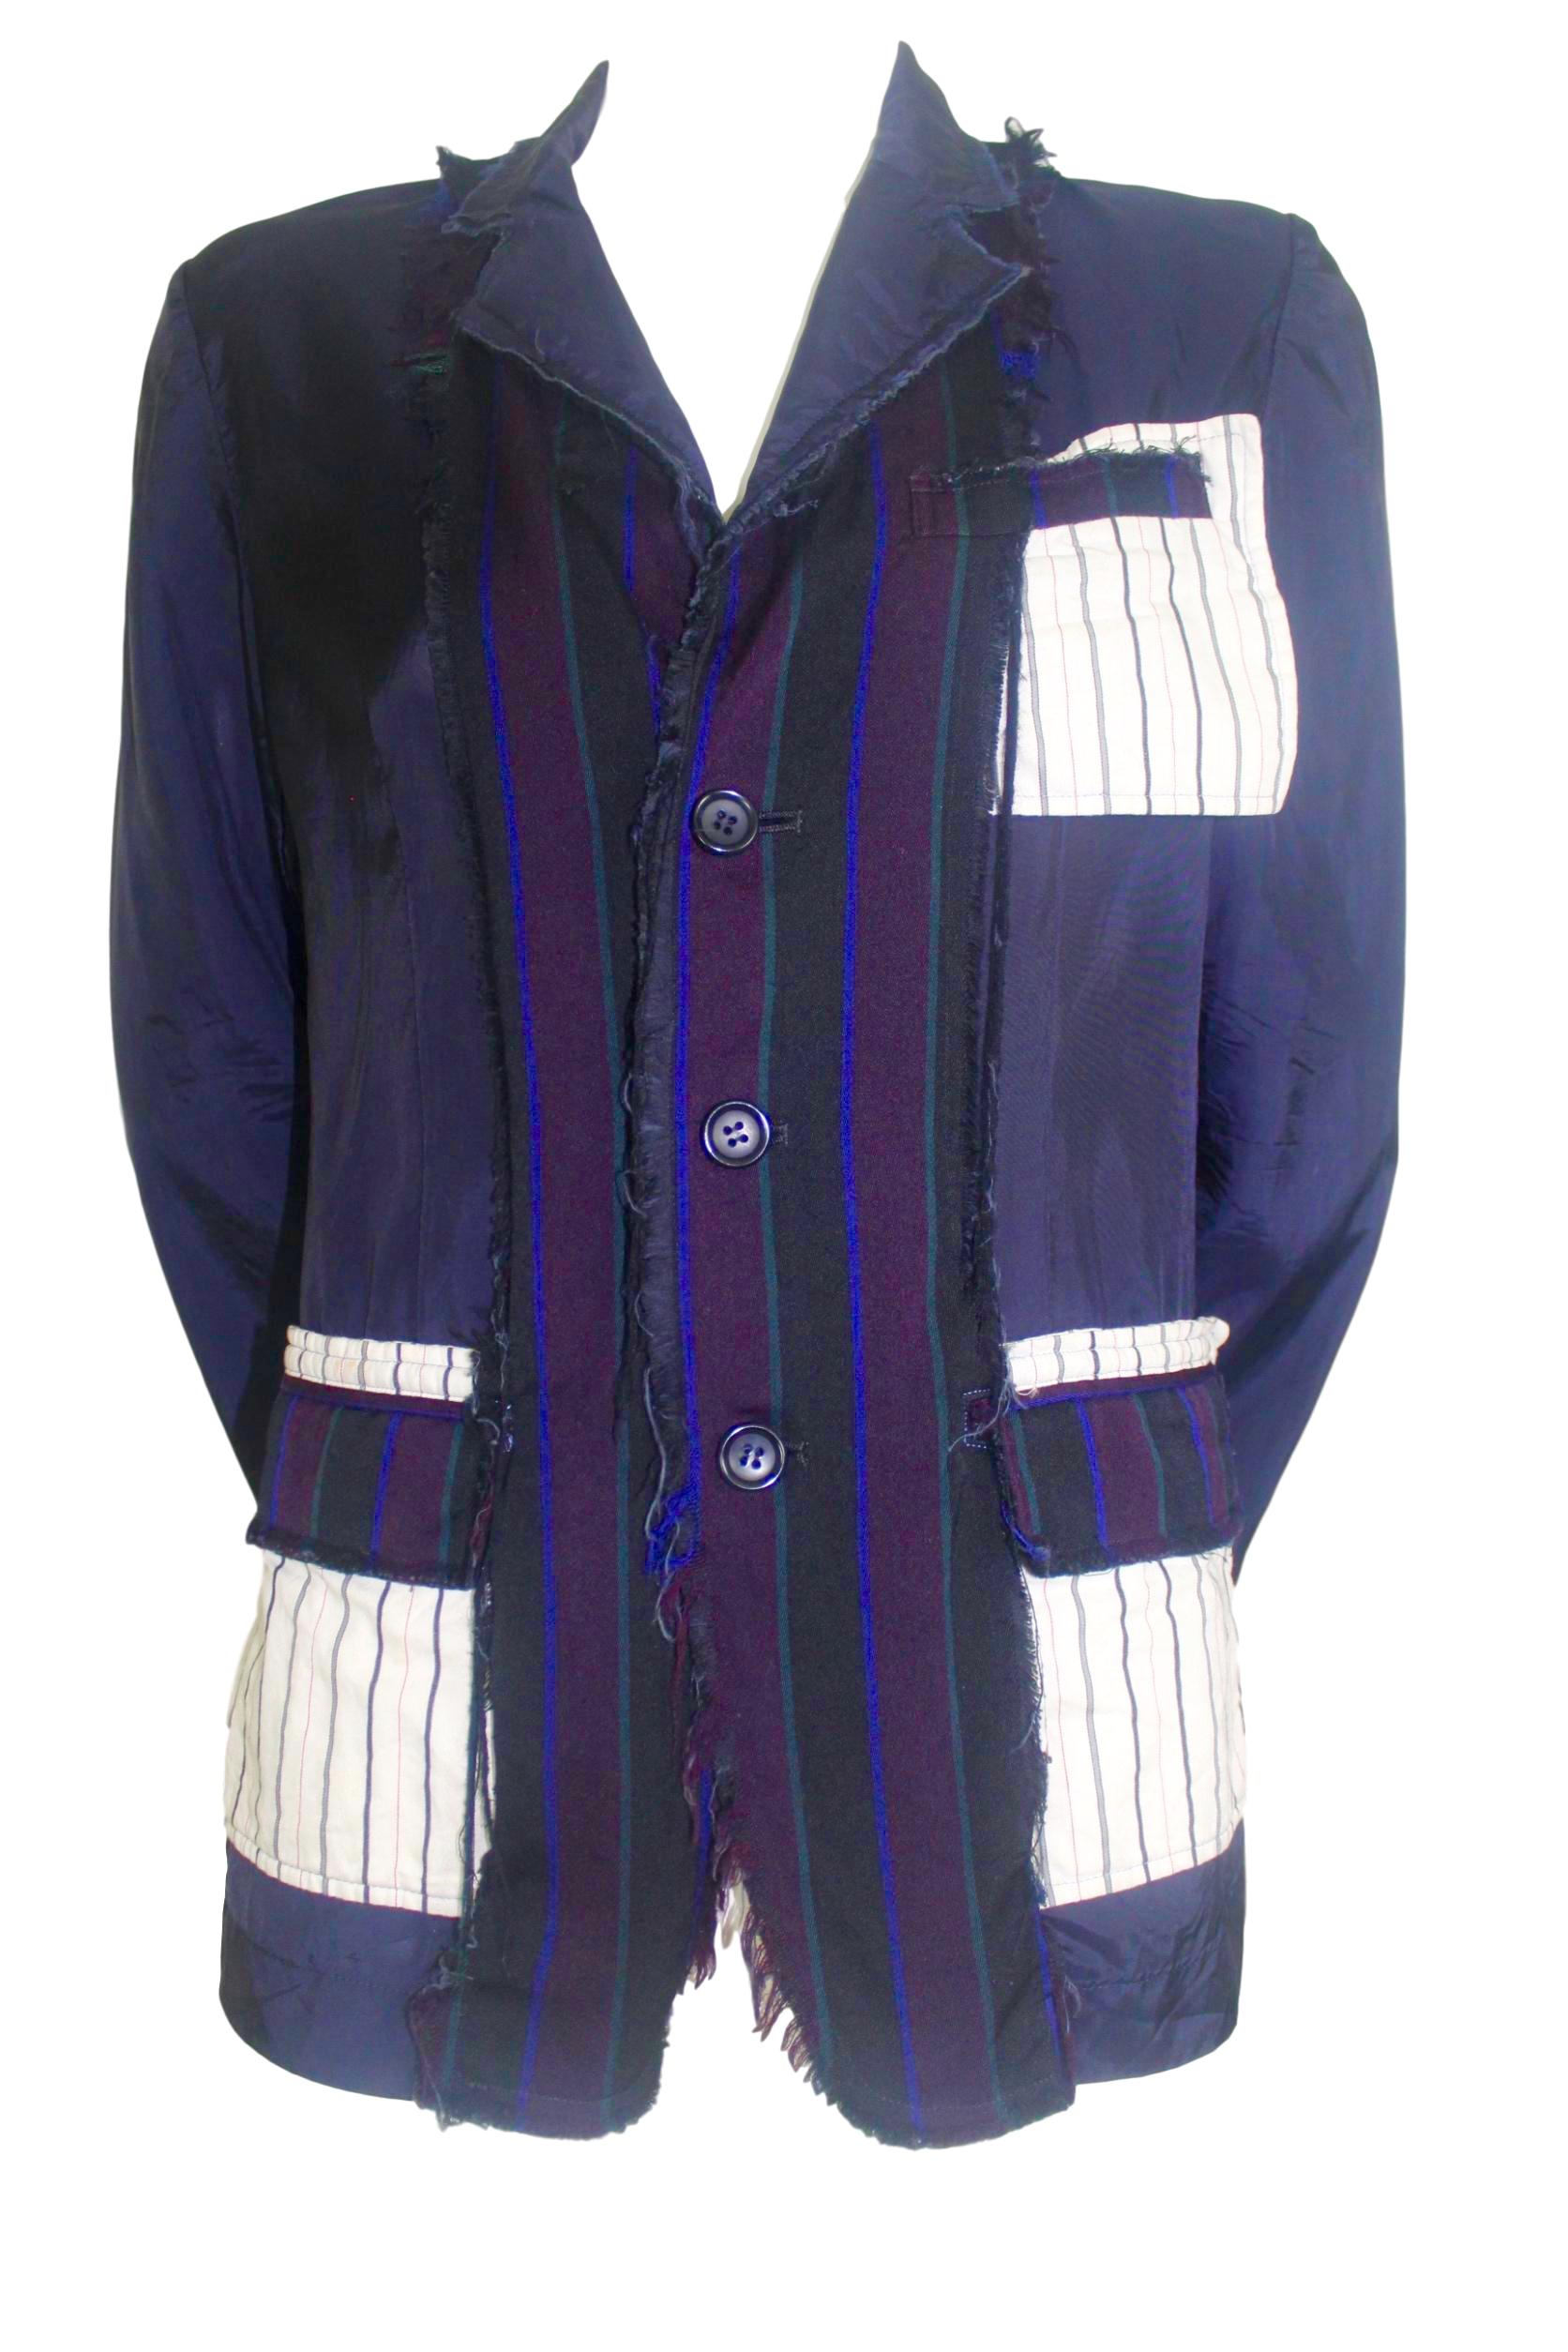 Comme des Garcons Tricot 2004 Cupro Deconstructed Jacket In Good Condition For Sale In Bath, GB